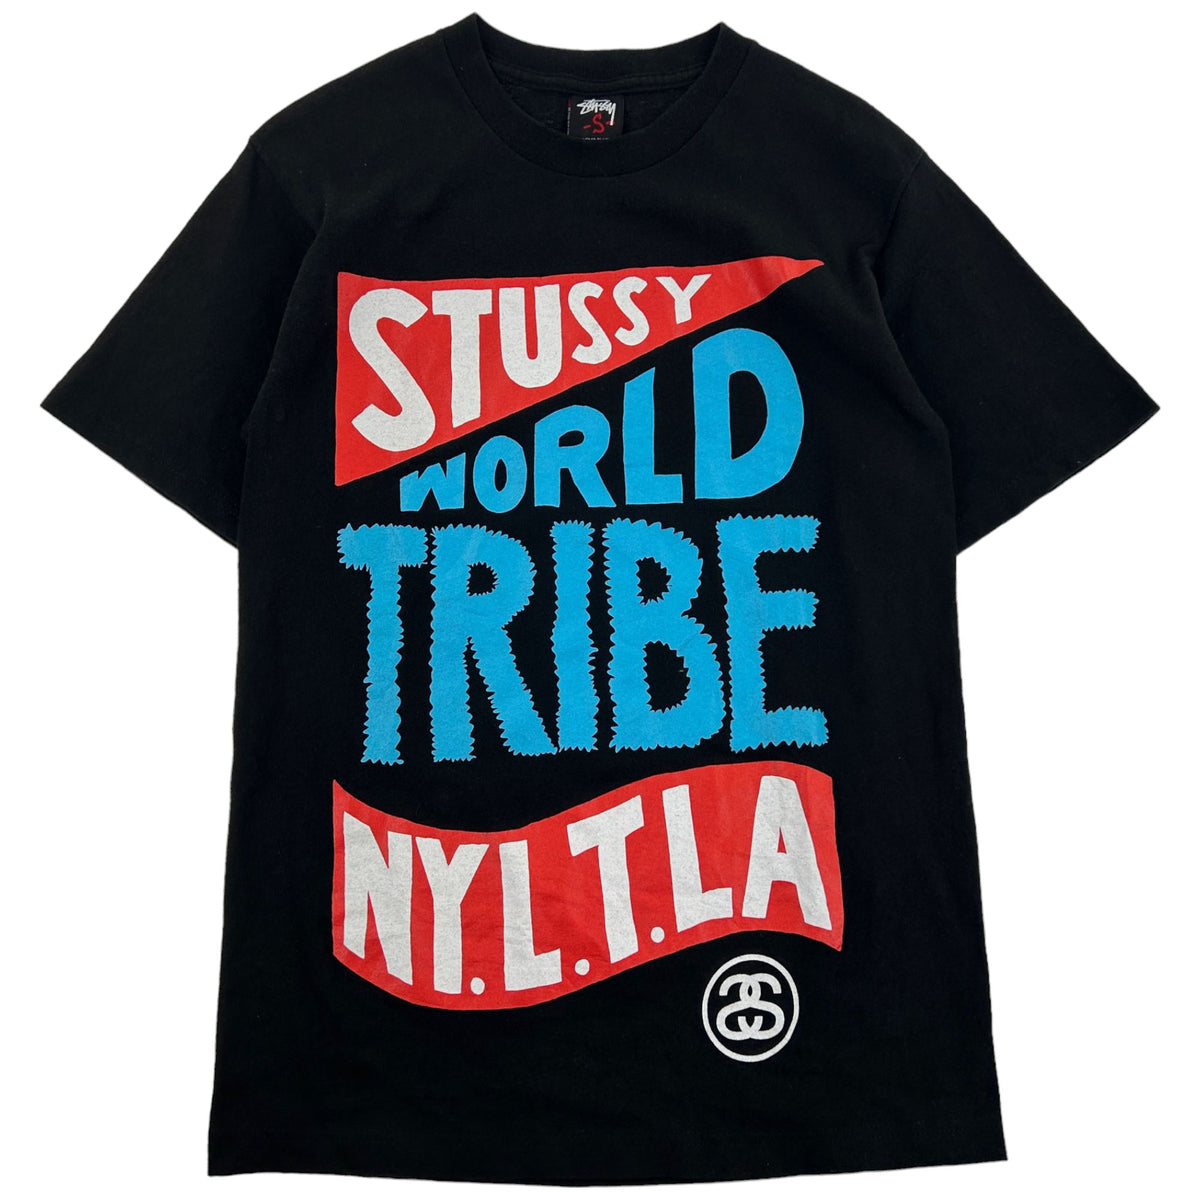 Vintage Stussy World Tribe Graphic T-Shirt Size S